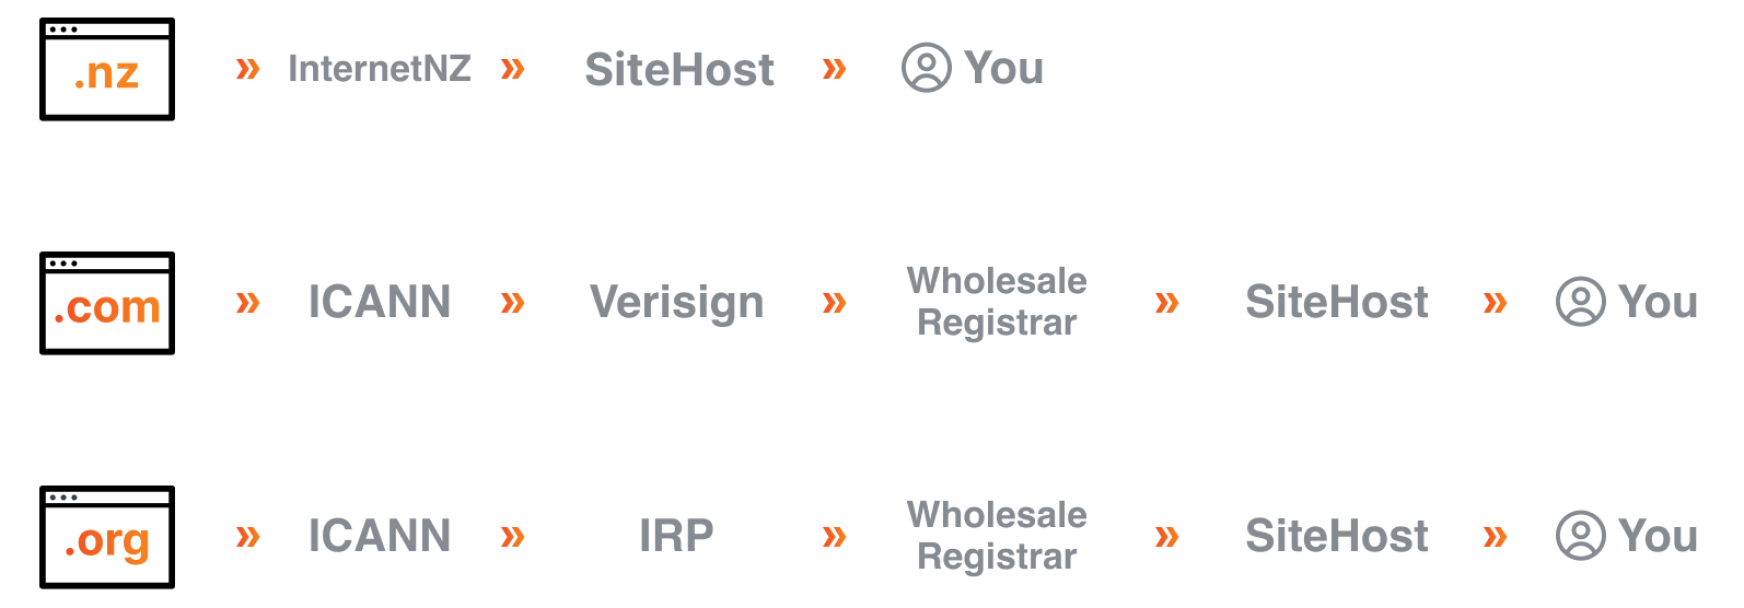 Domain name supply chains - where SiteHost sources .nz, .com and .org for you.